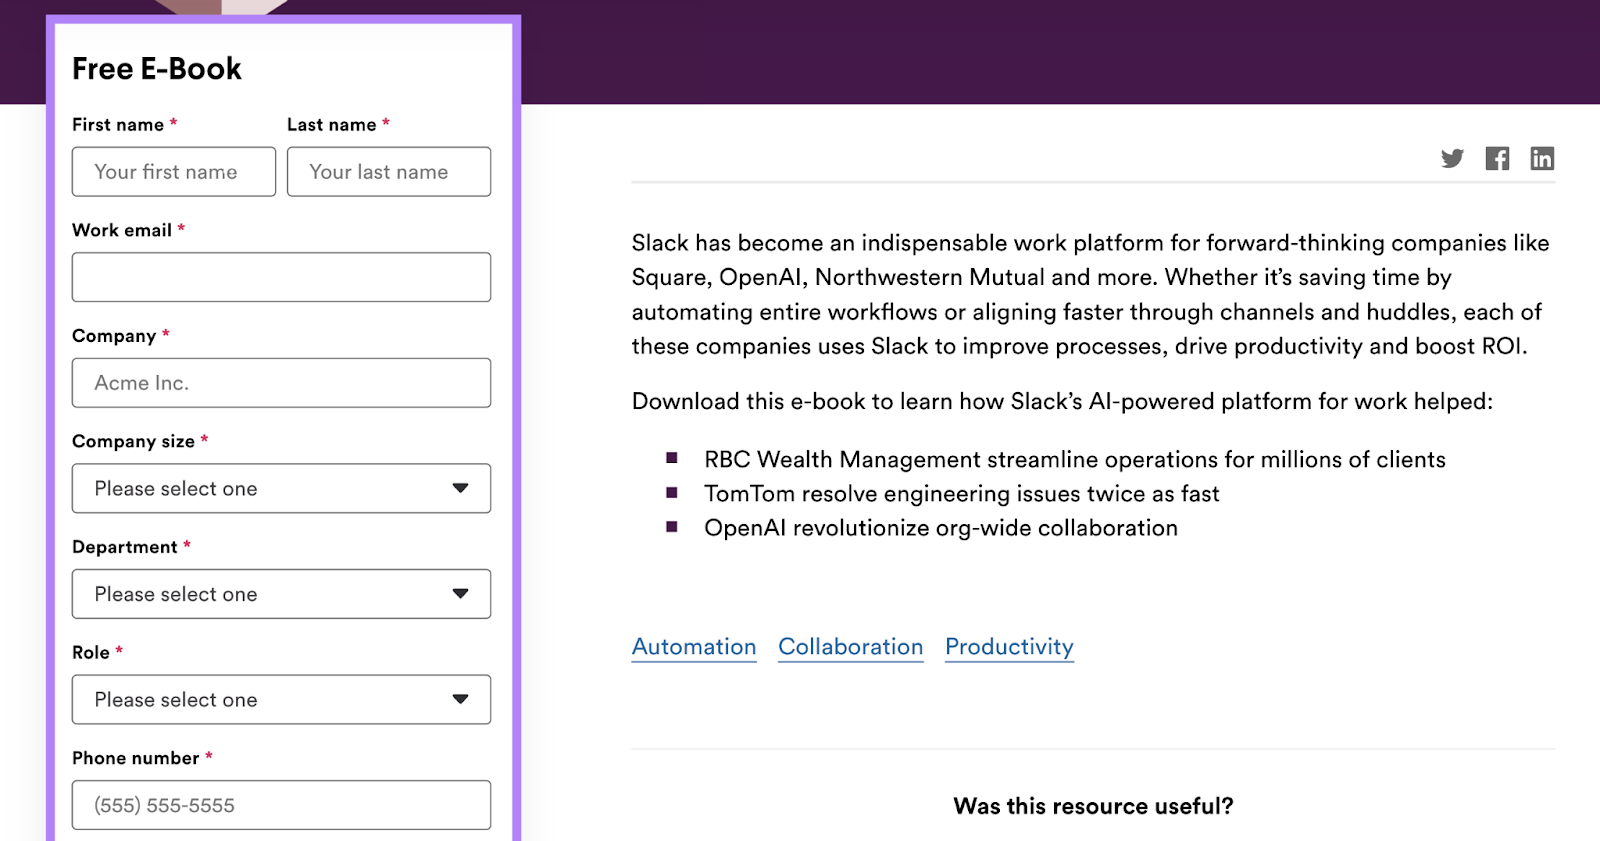 slack's free e-book gated content form helps with lead generation